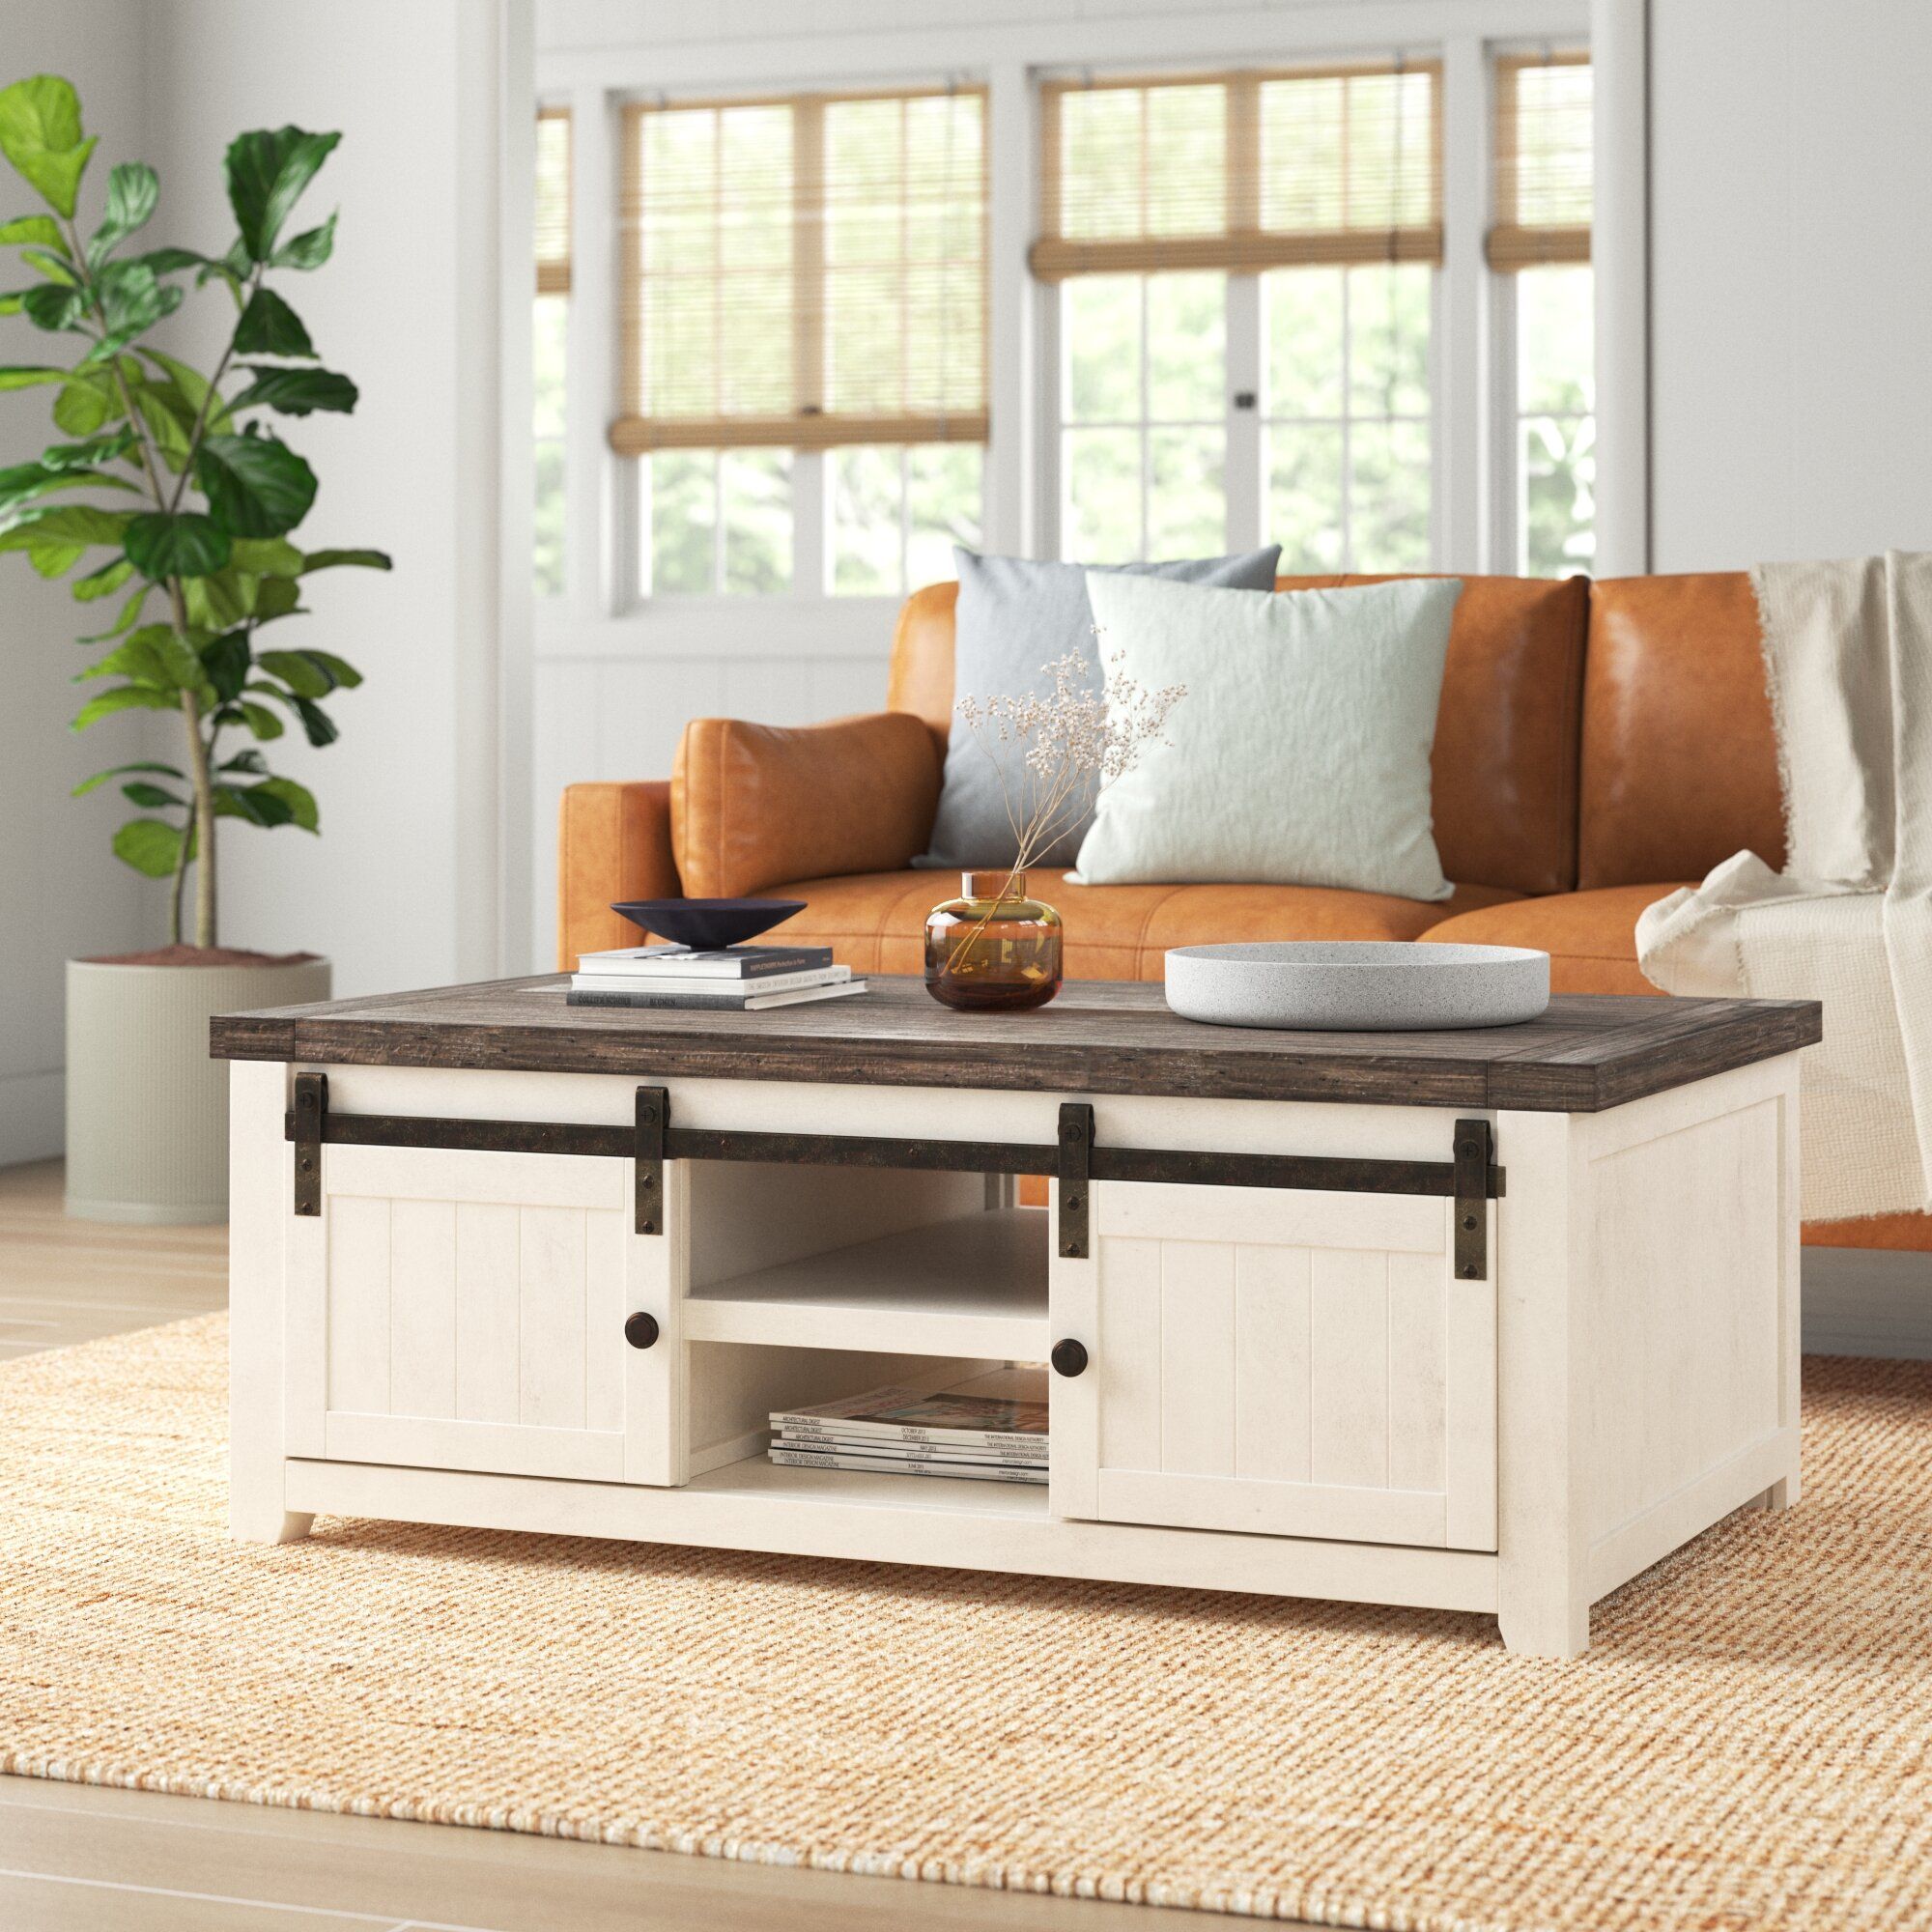 Sand & Stable Coffee Table & Reviews | Wayfair Regarding Coffee Tables With Storage And Barn Doors (View 4 of 15)